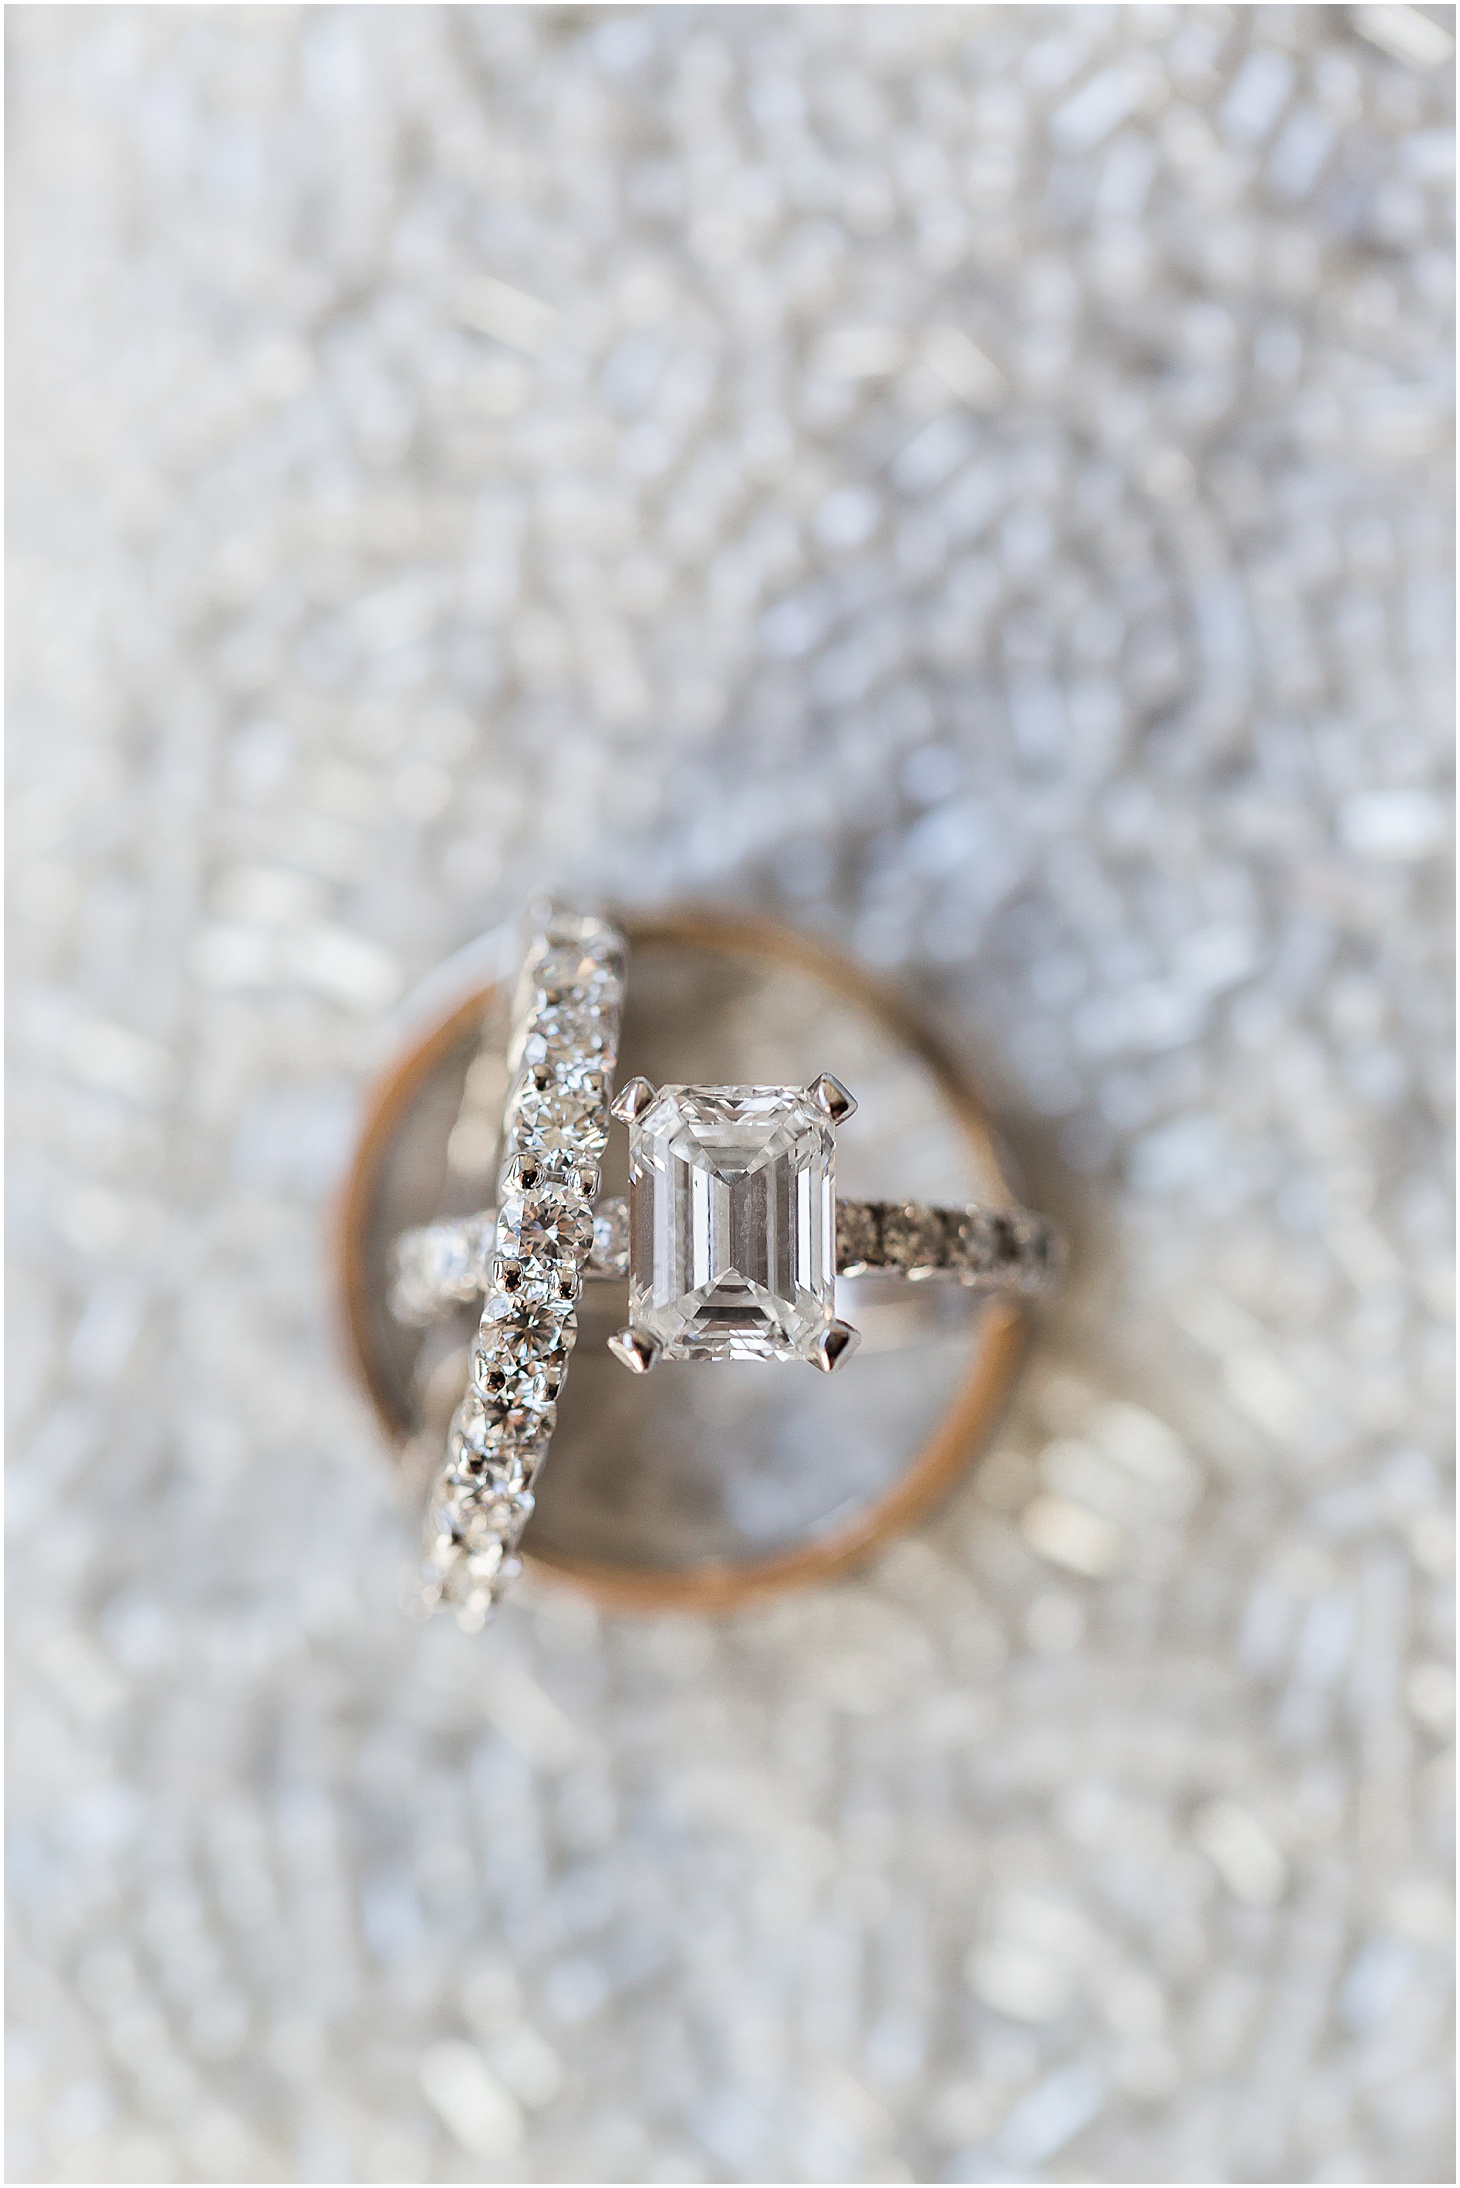 Engagement Ring Detail, Romantic Candlelight Italian Wedding at Andrew Mellon Auditorium, Ralphie's Jewelry and Joey's Gems Engagement Ring and Wedding Bands, Ceremony at the Shrine of the Most Blessed Sacrament, Sarah Bradshaw Photography